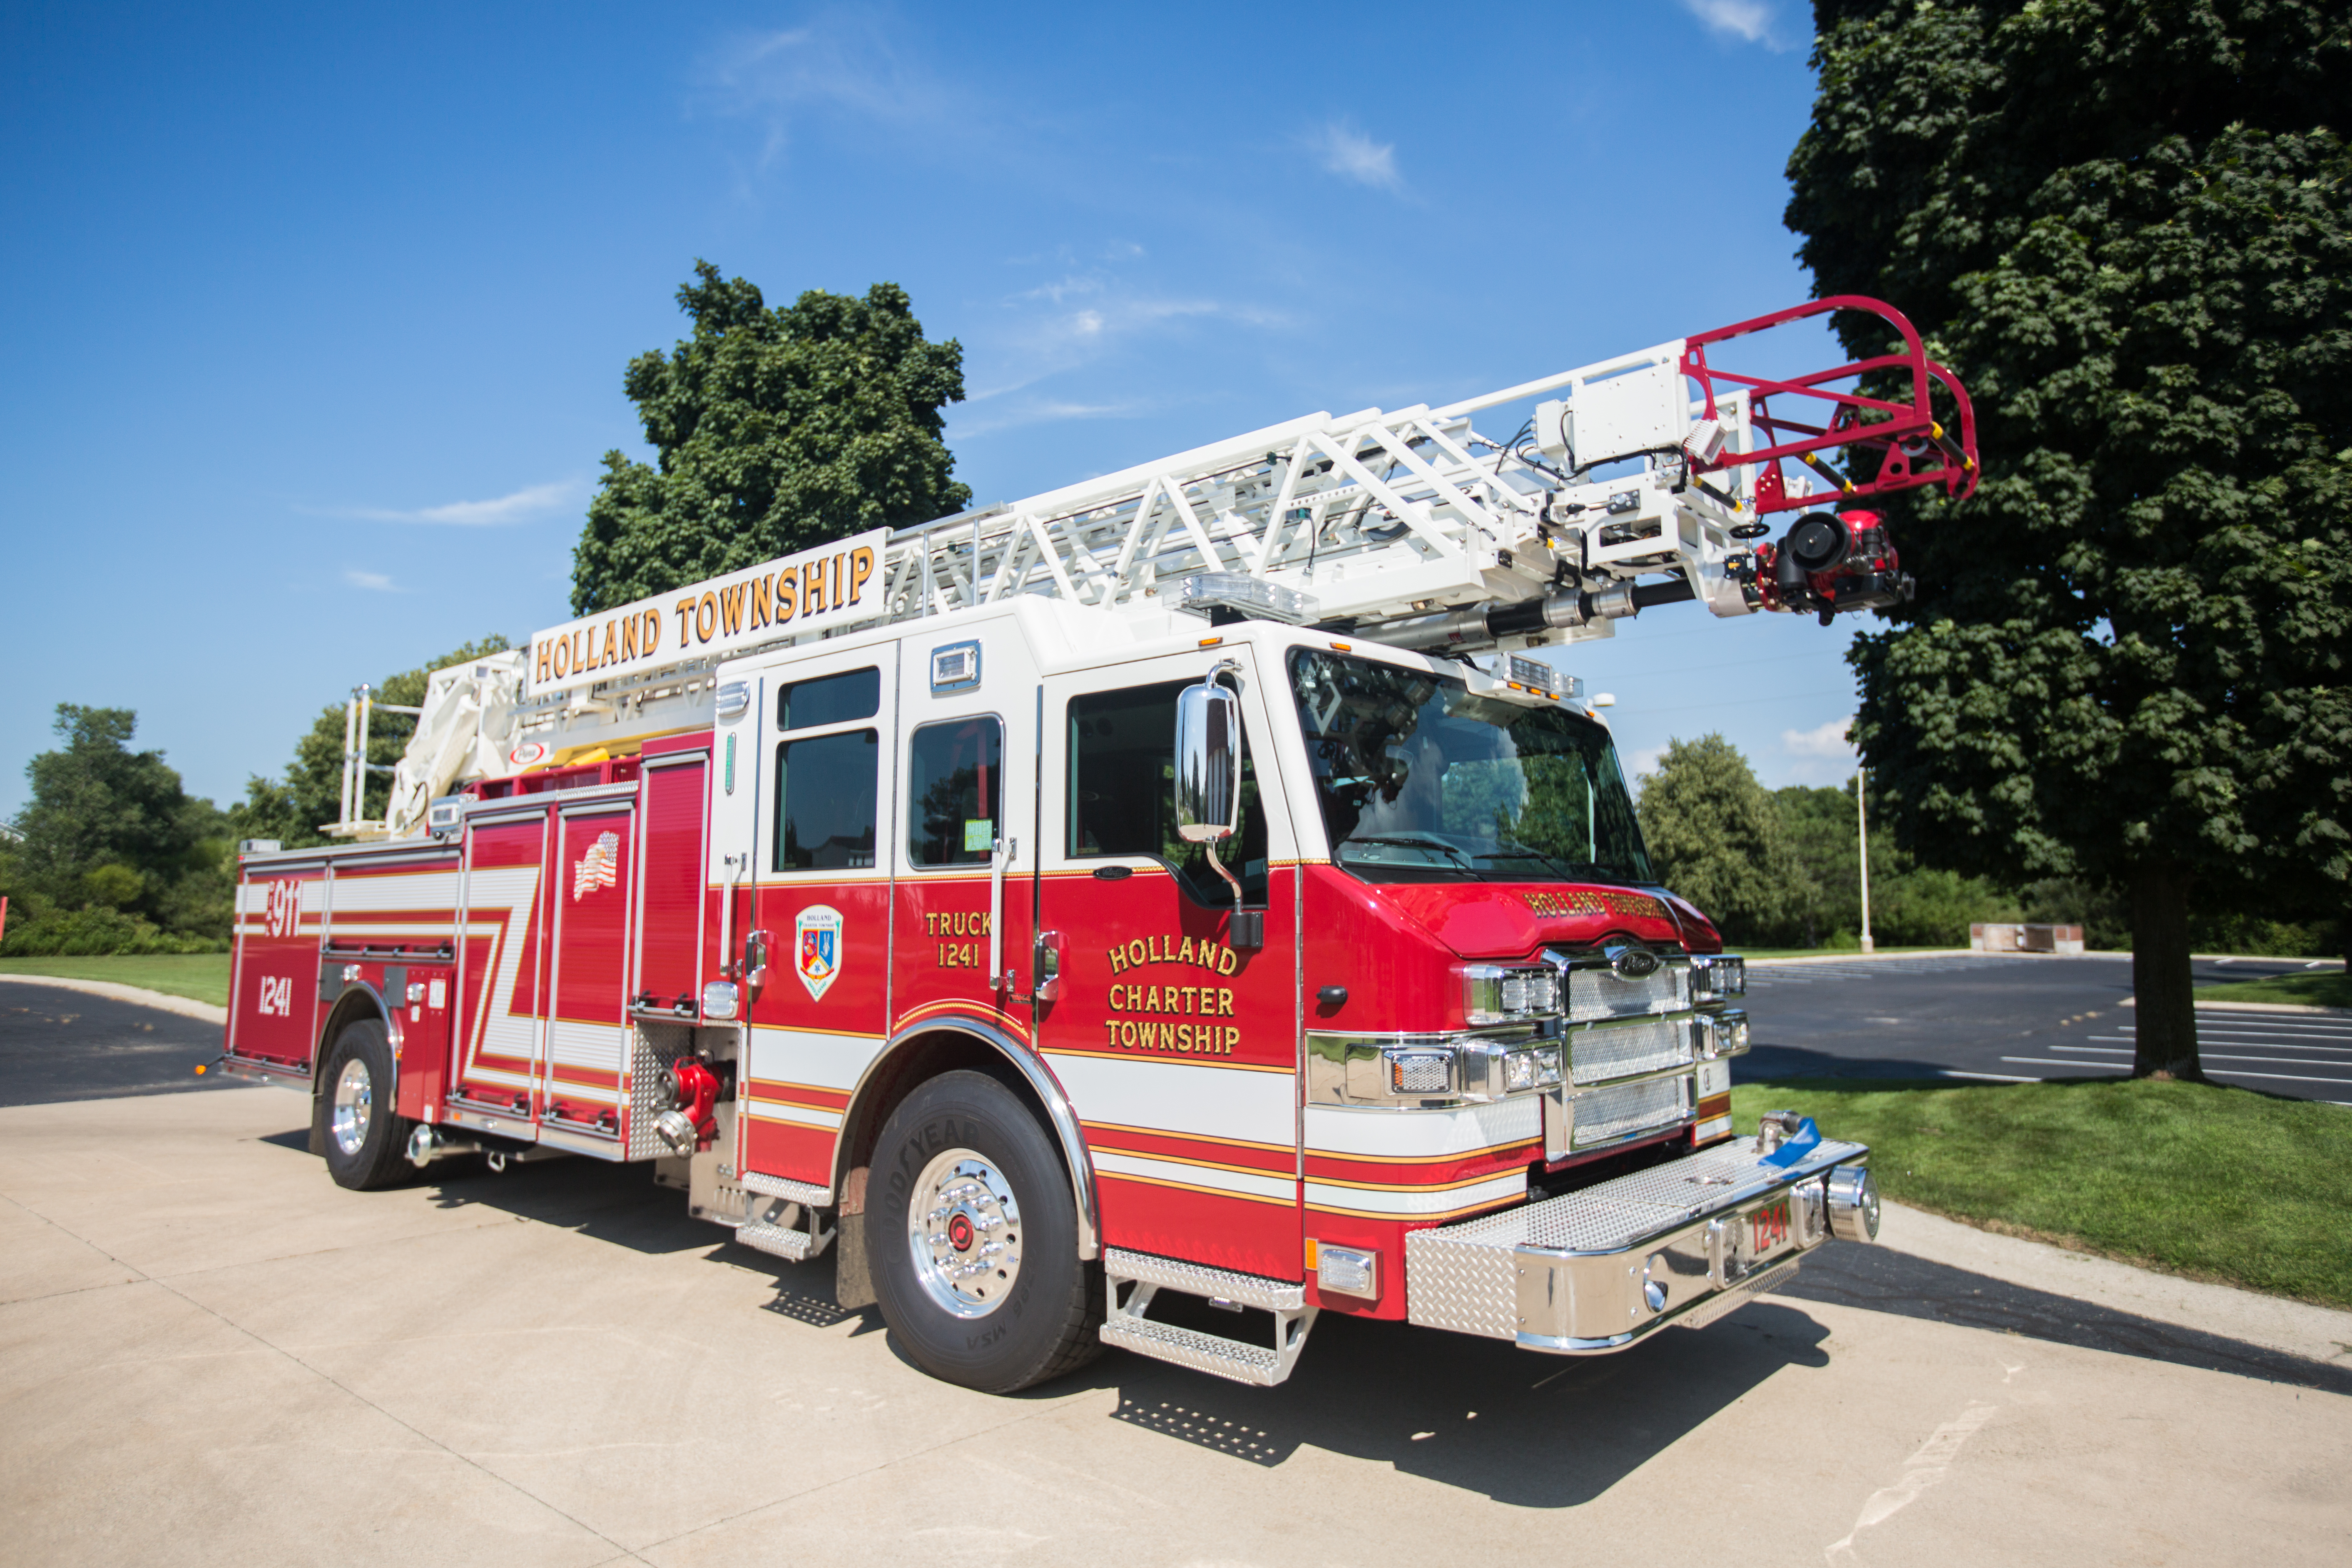 Annual Fire Truck Parade on Oct. 7